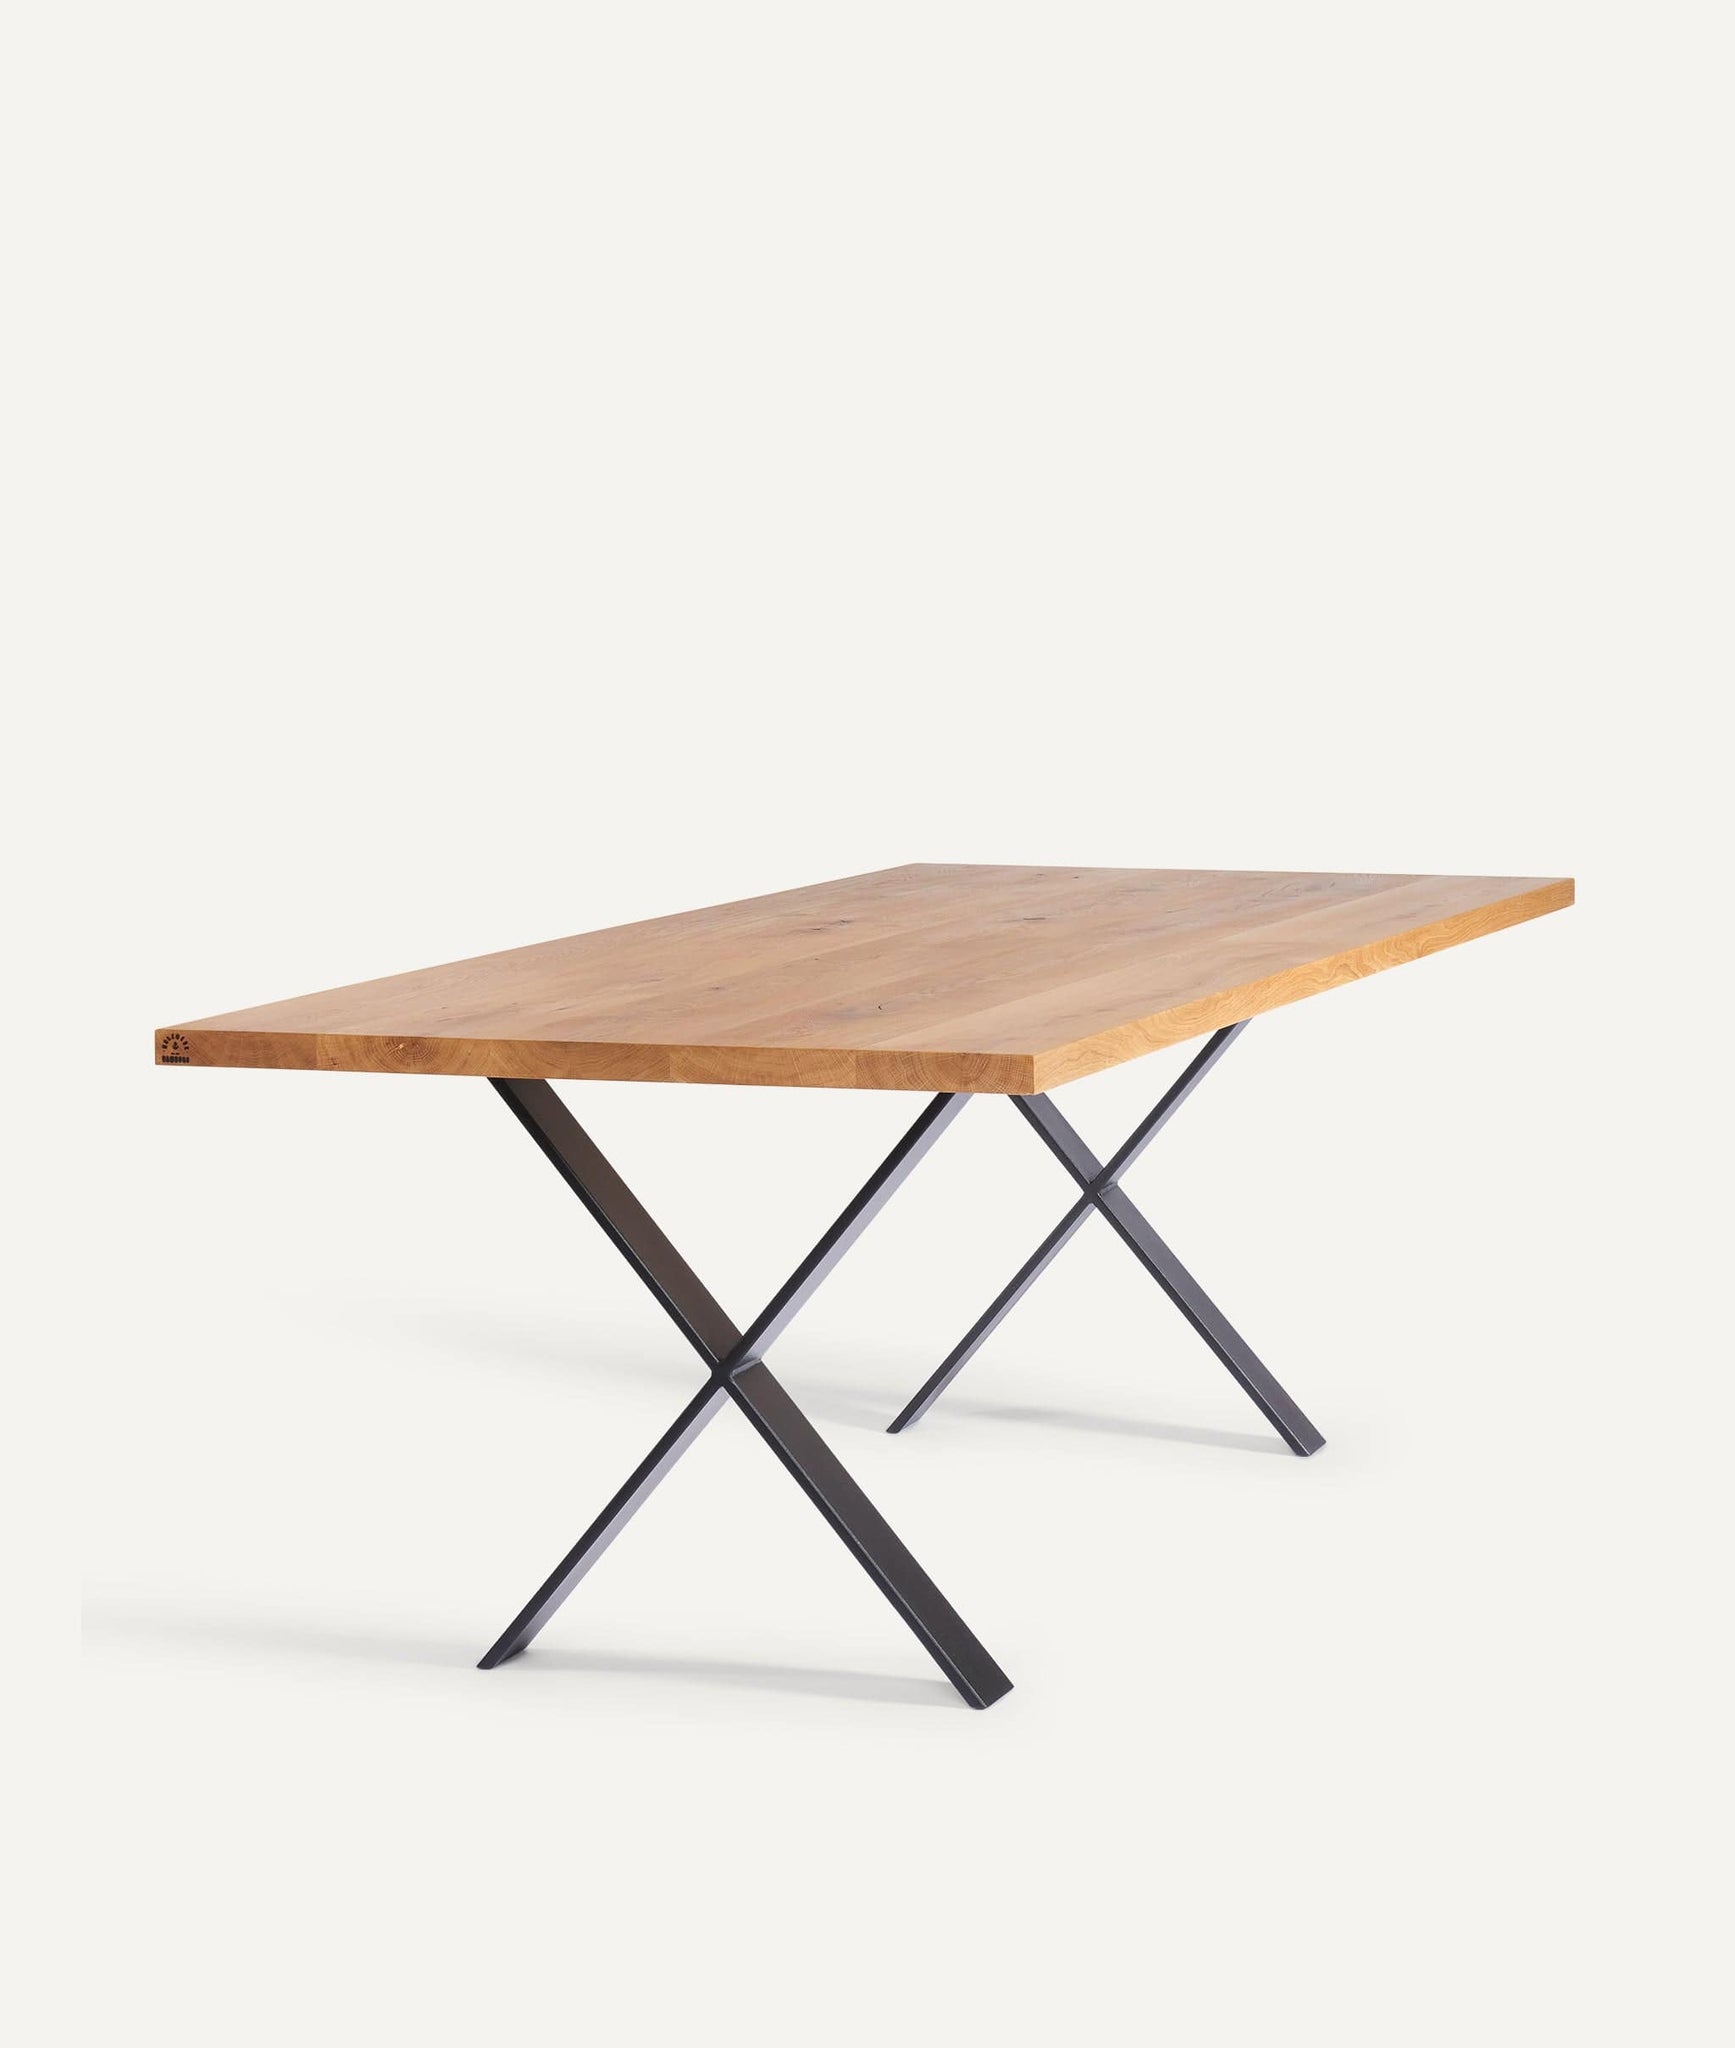 Table in Solid Wood with X-Shaped Metal Frame